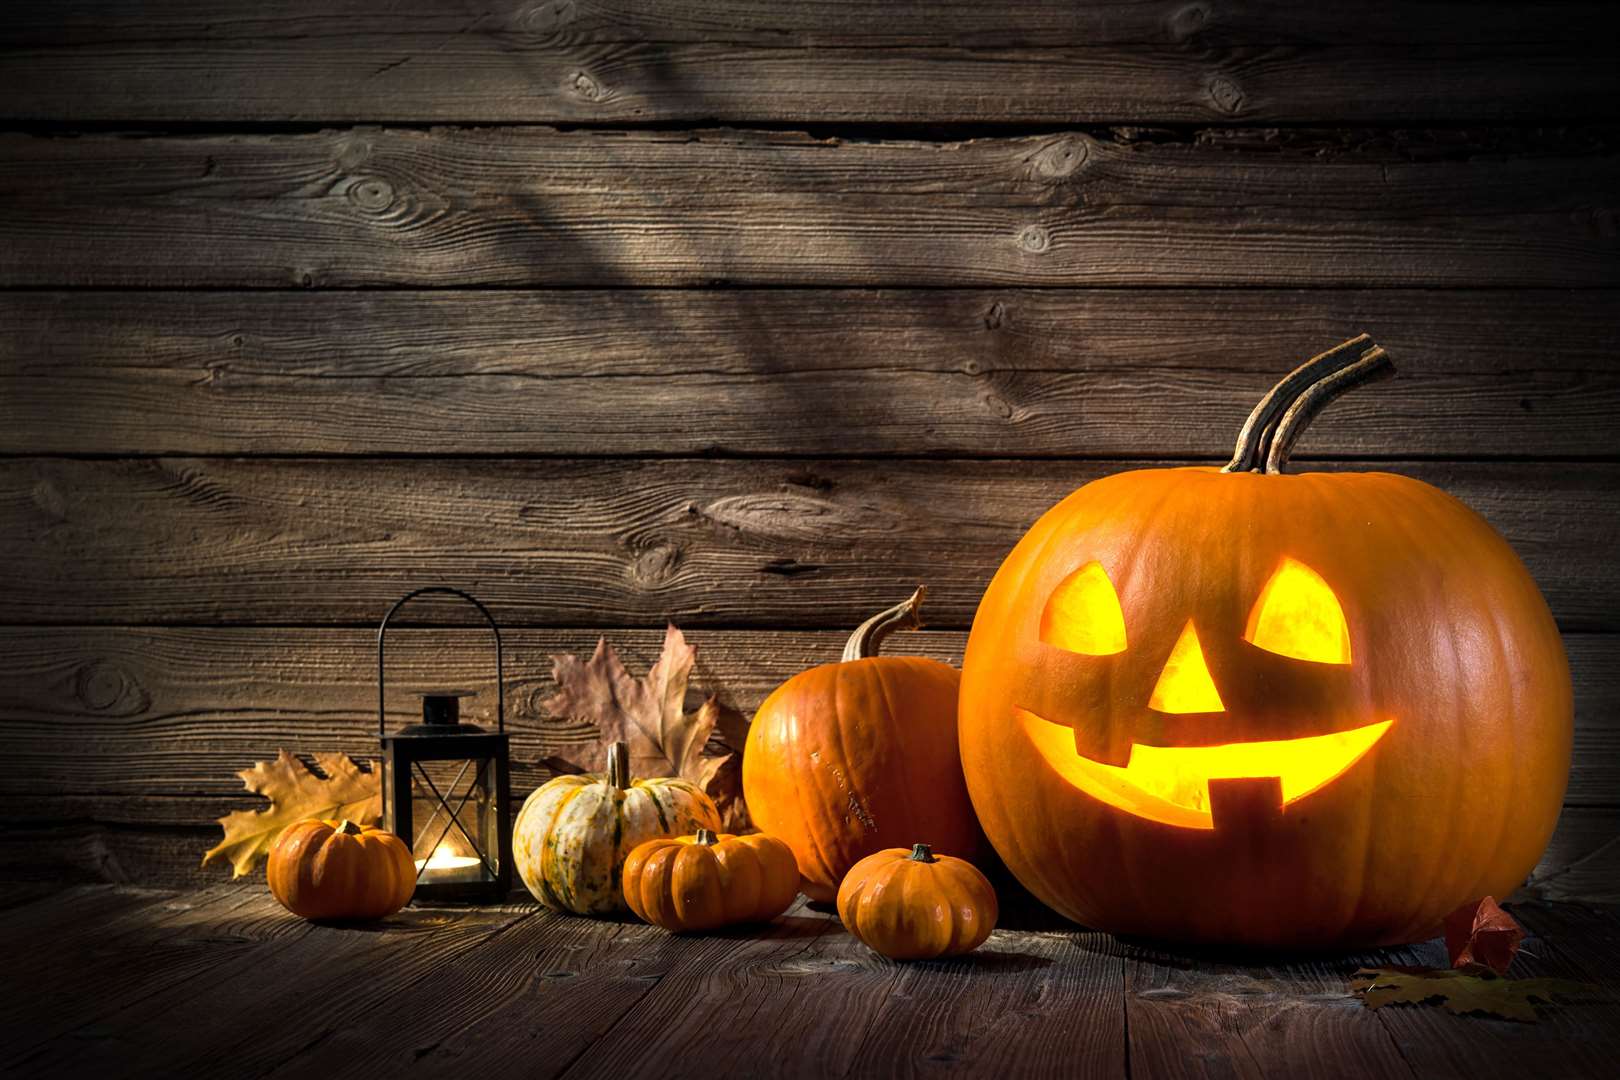 Pumpkins at Halloween. Picture: iStock/PA